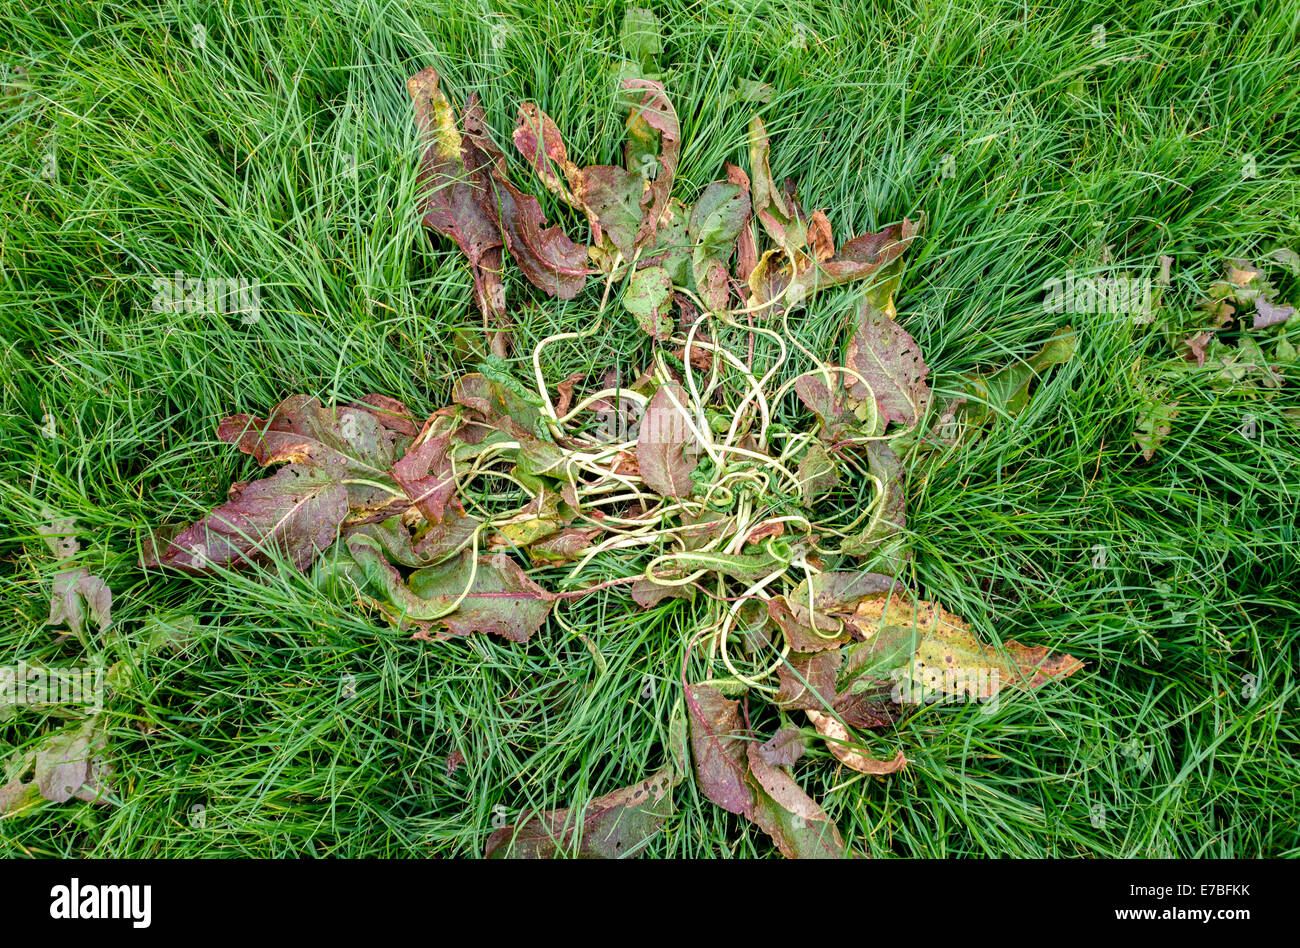 Dock plant killed by broad leaf agricultural weed killer in a Somerset rye grass field UK Stock Photo